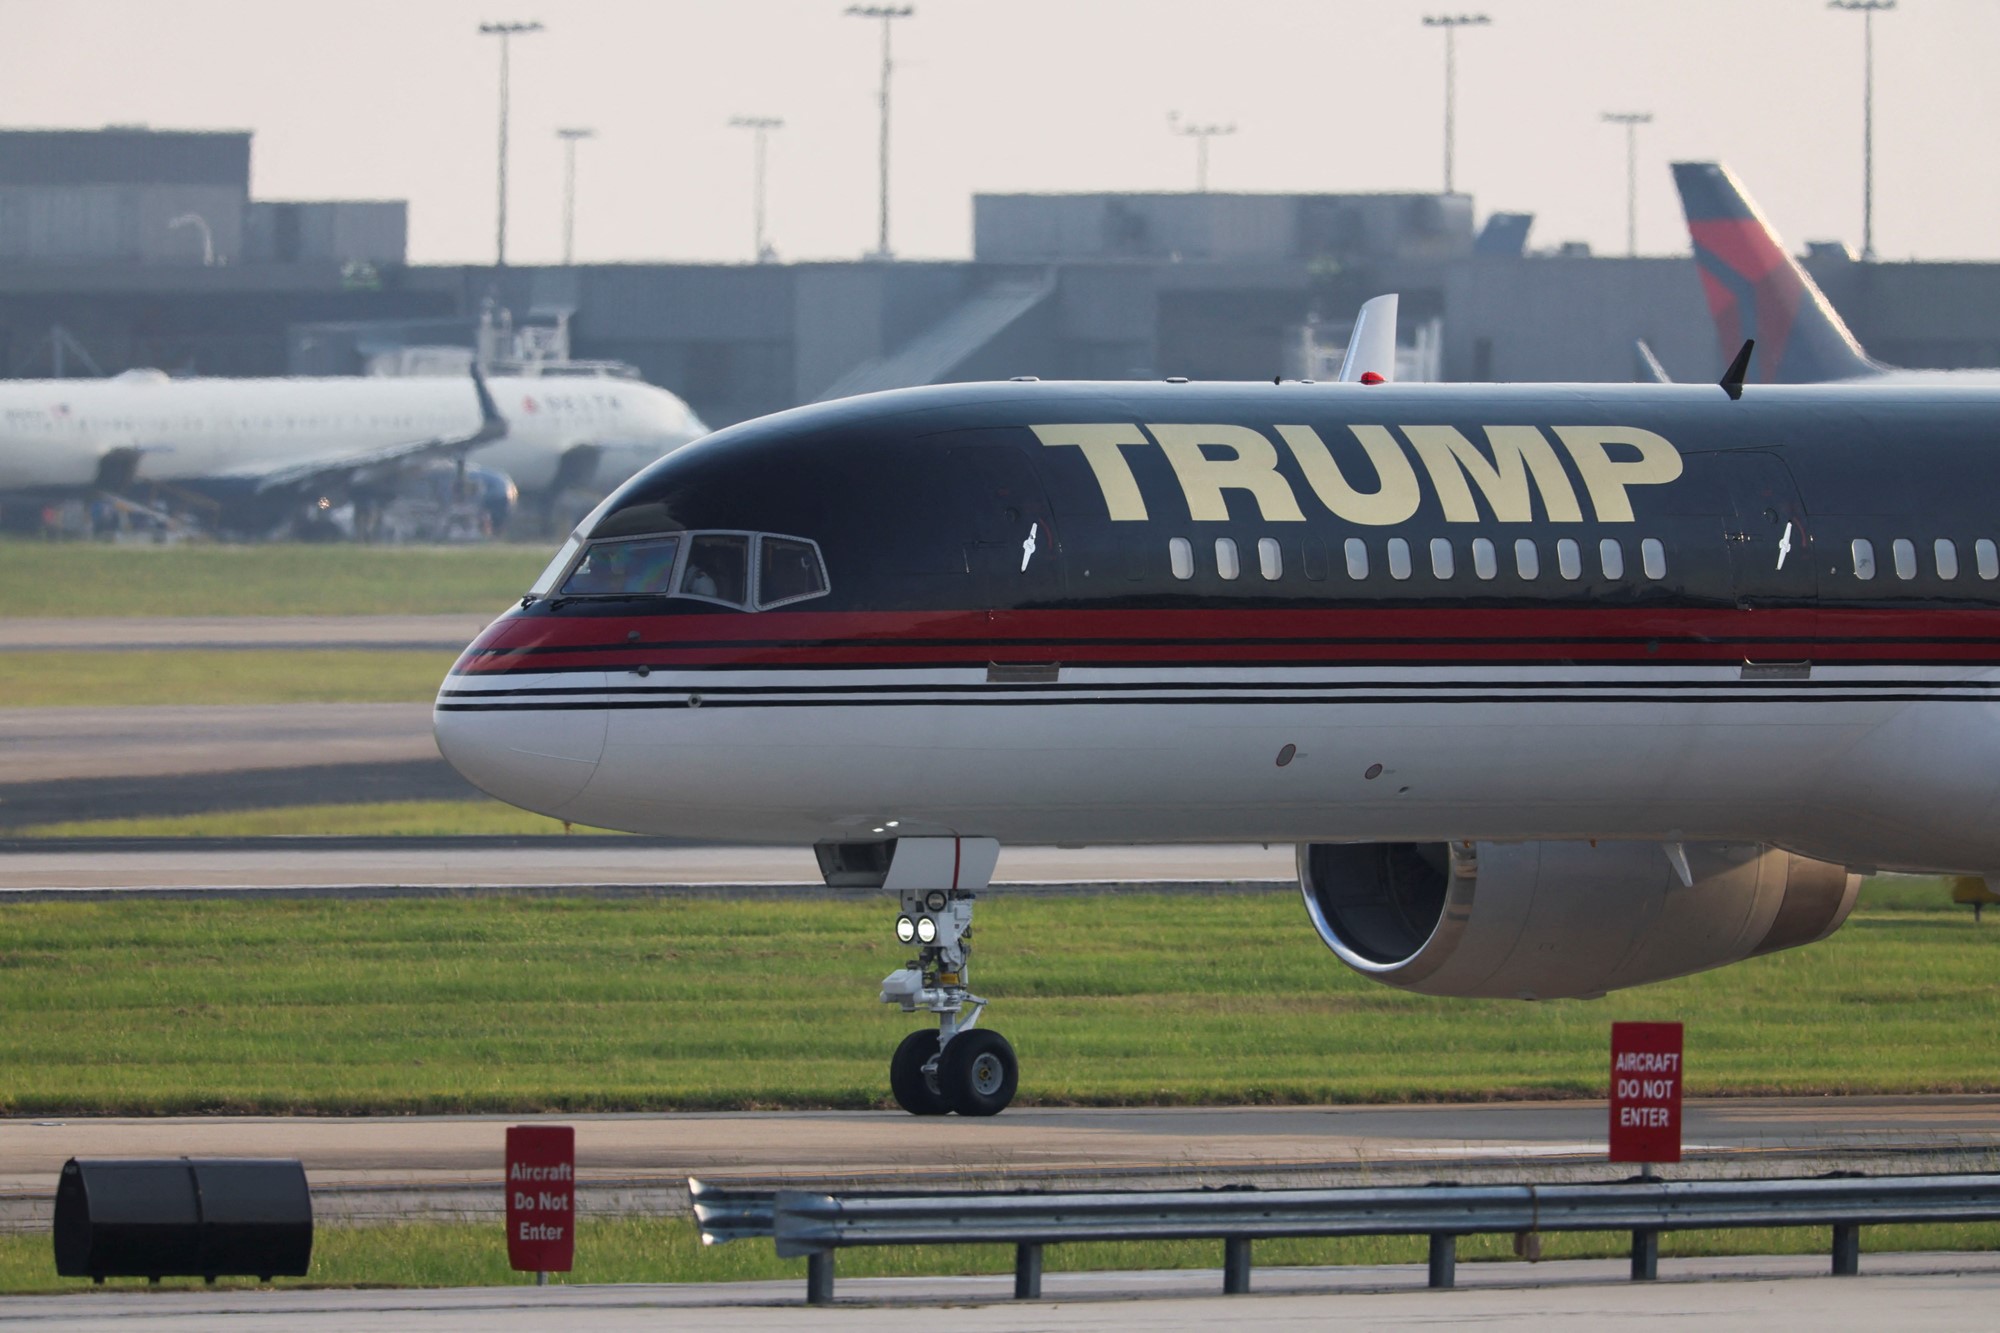 Trump force one blue and red 